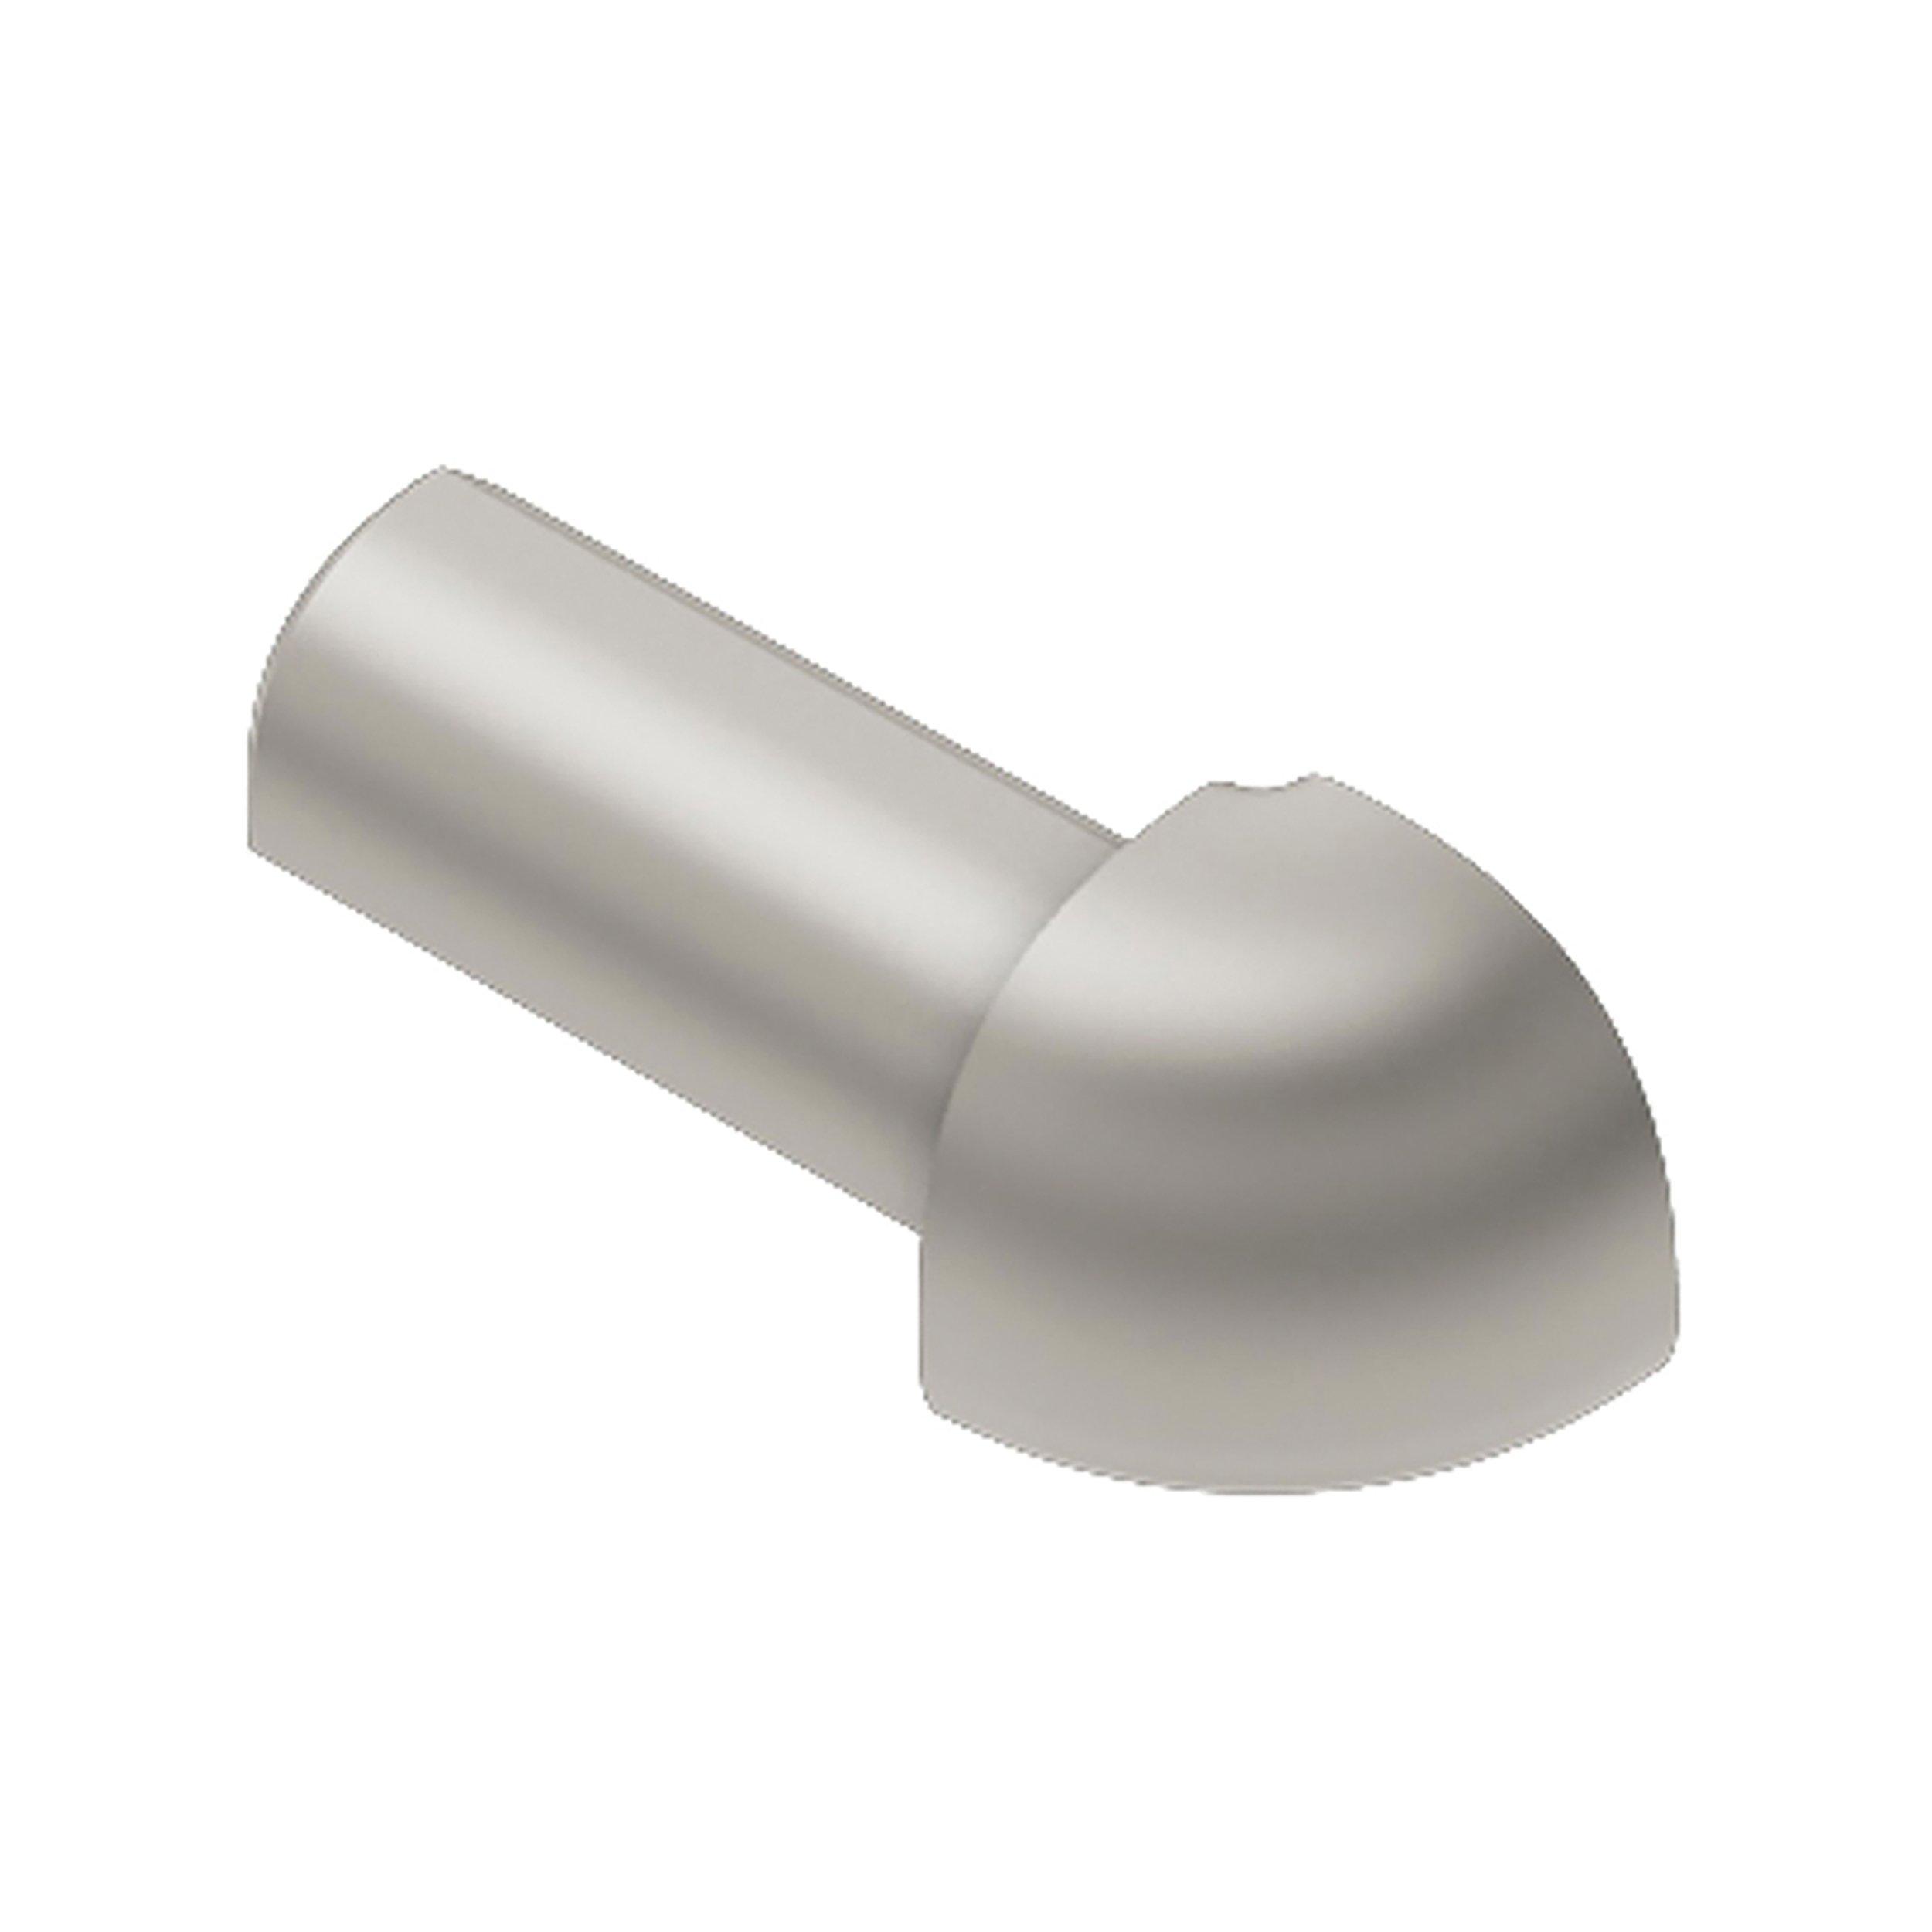 Schluter-Rondec Outside Corner for 1/2in. Satin Nickel Anodized Aluminum Rondec Profile